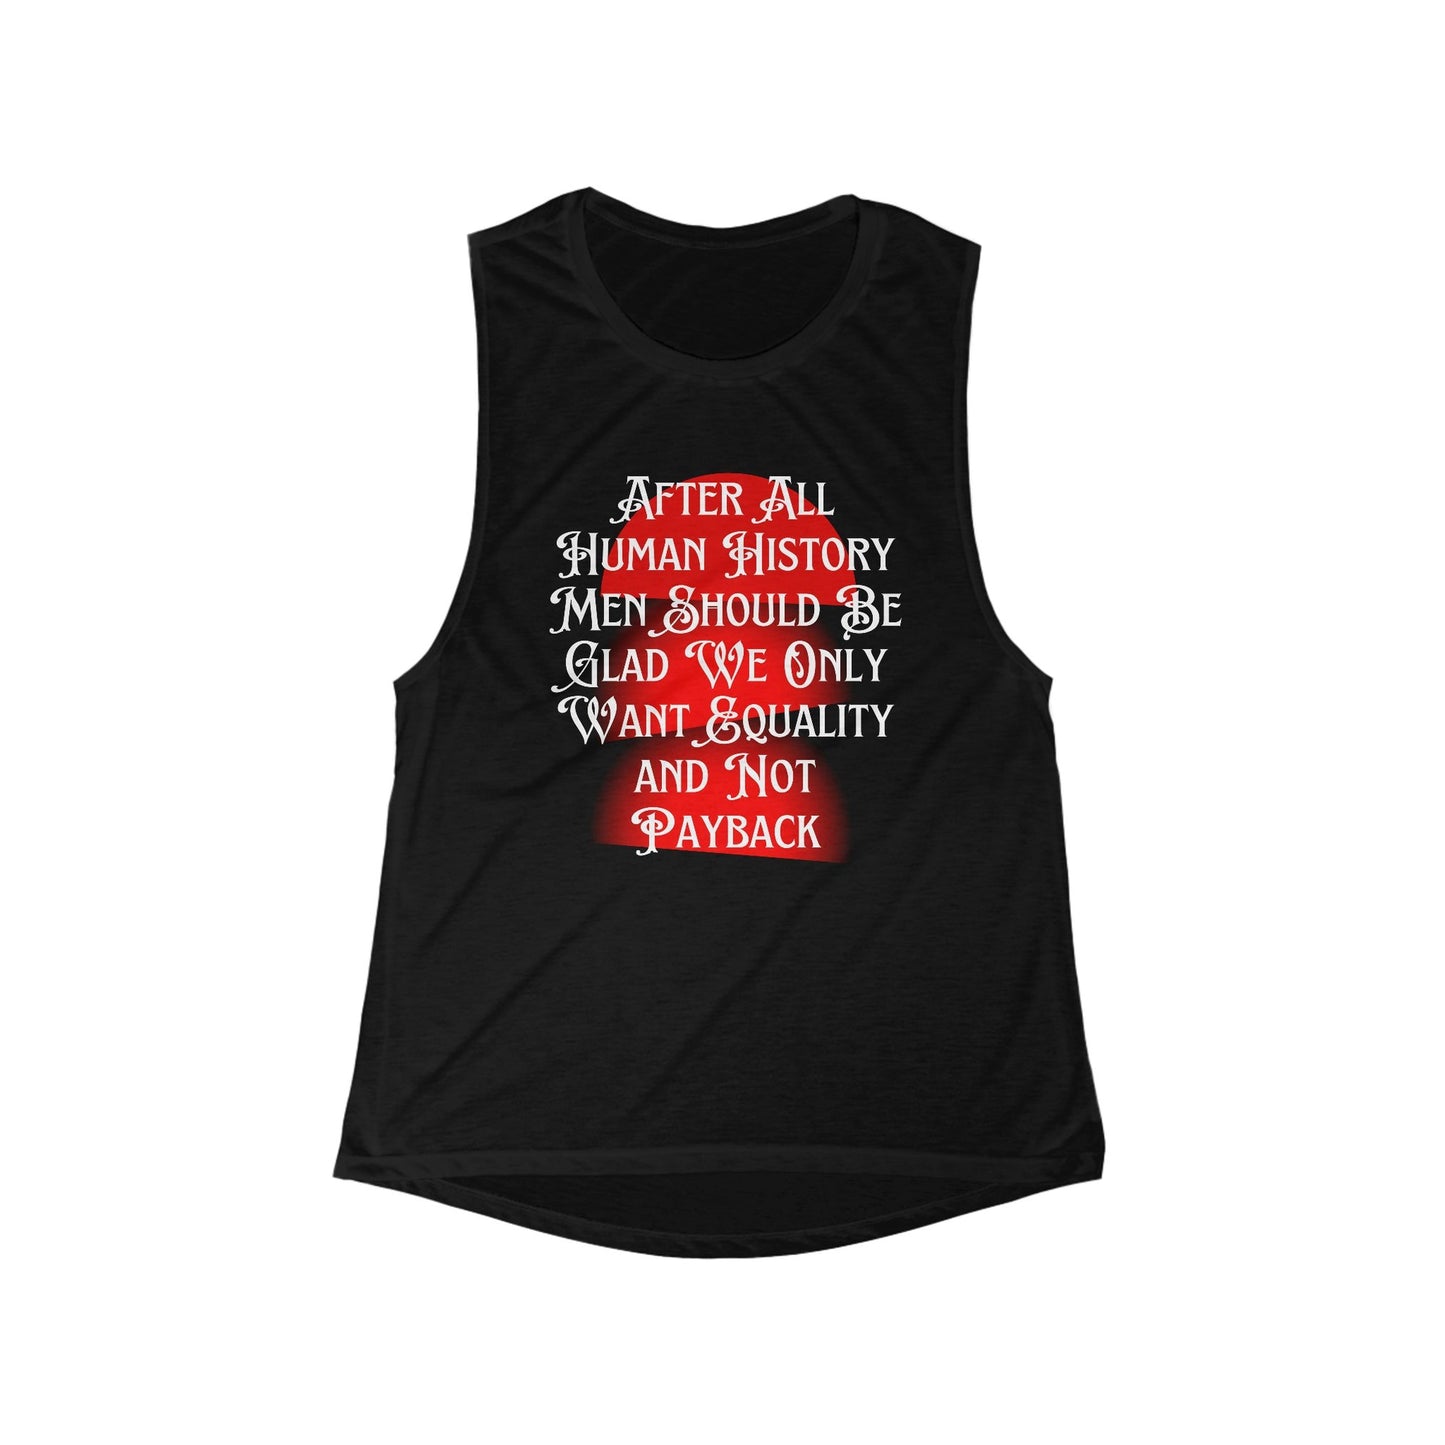 Equality Not Payback Women's Feminist Flowy Scoop Muscle Tank